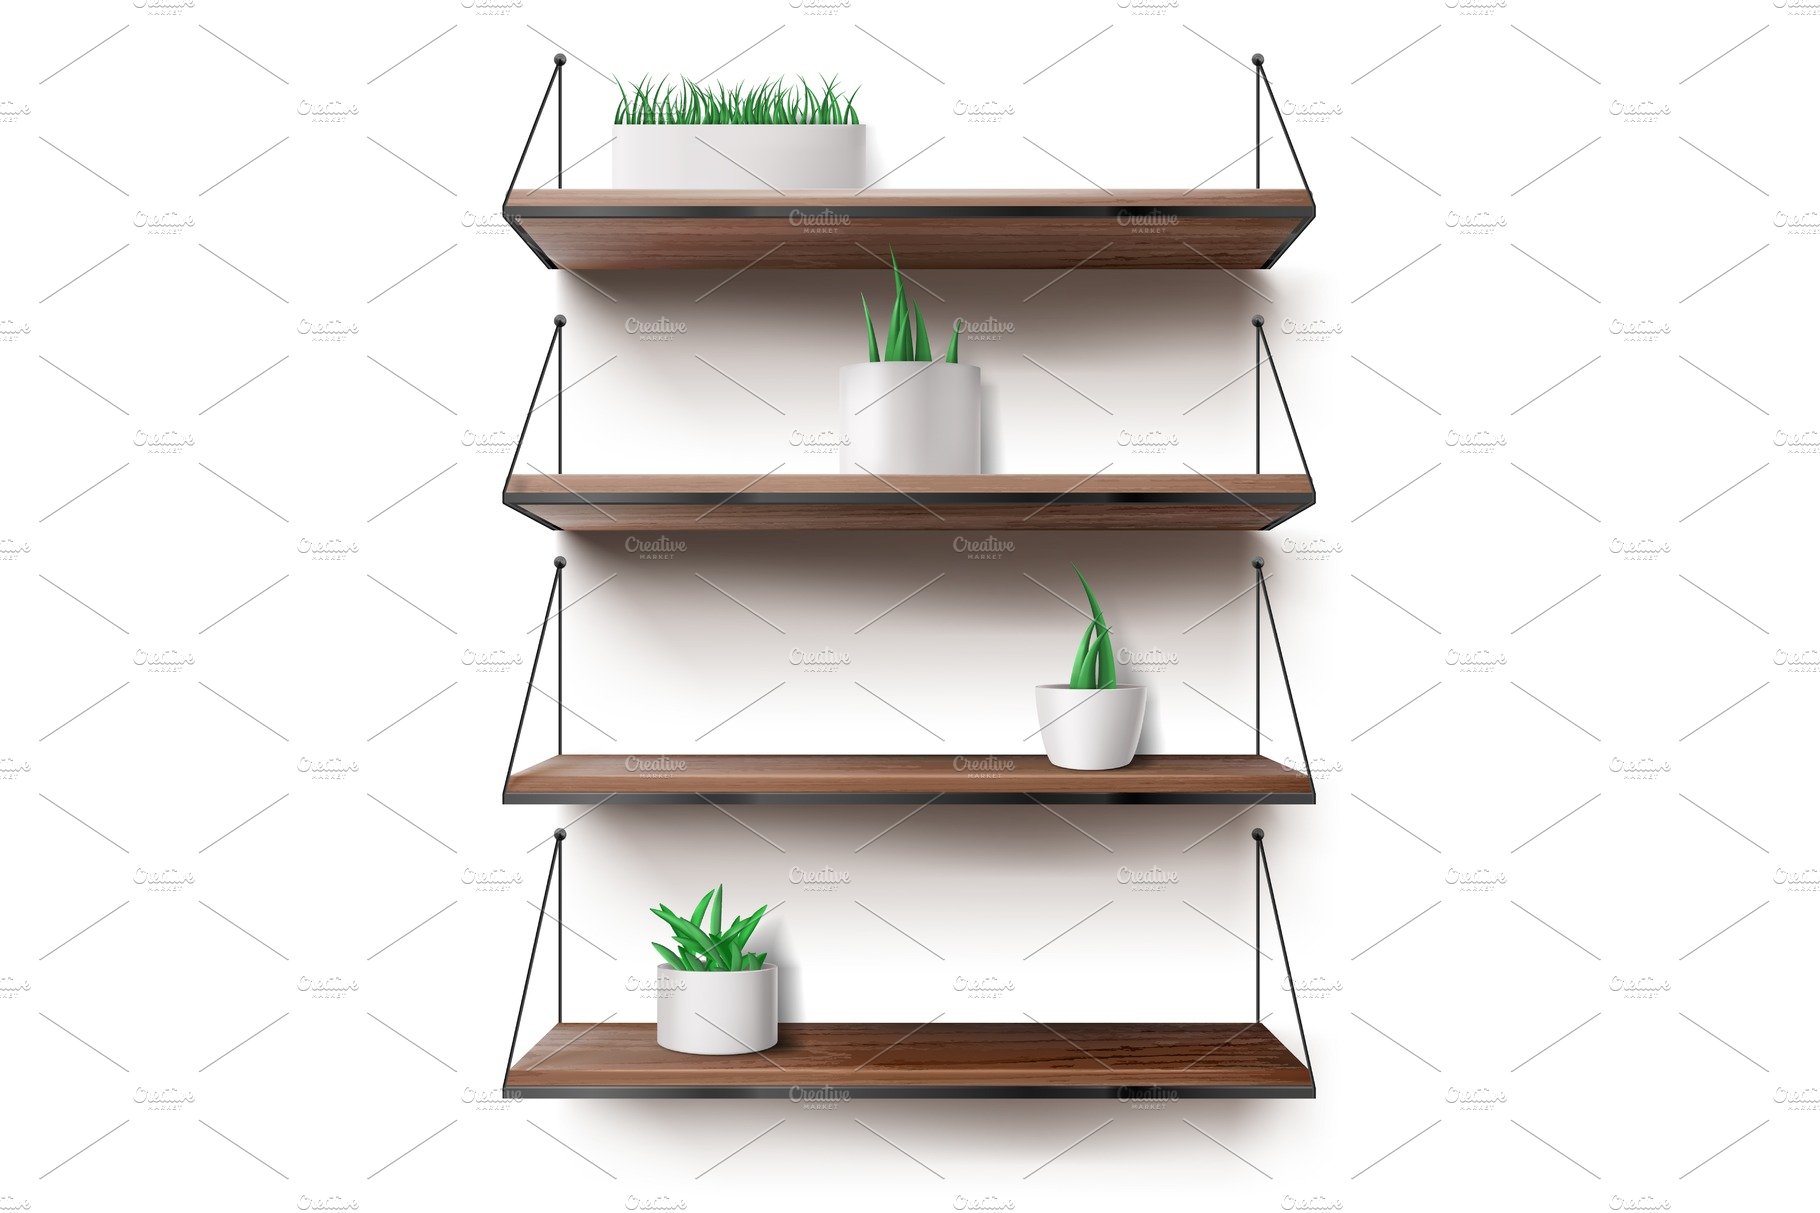 Wooden shelves hanging on ropes with cover image.